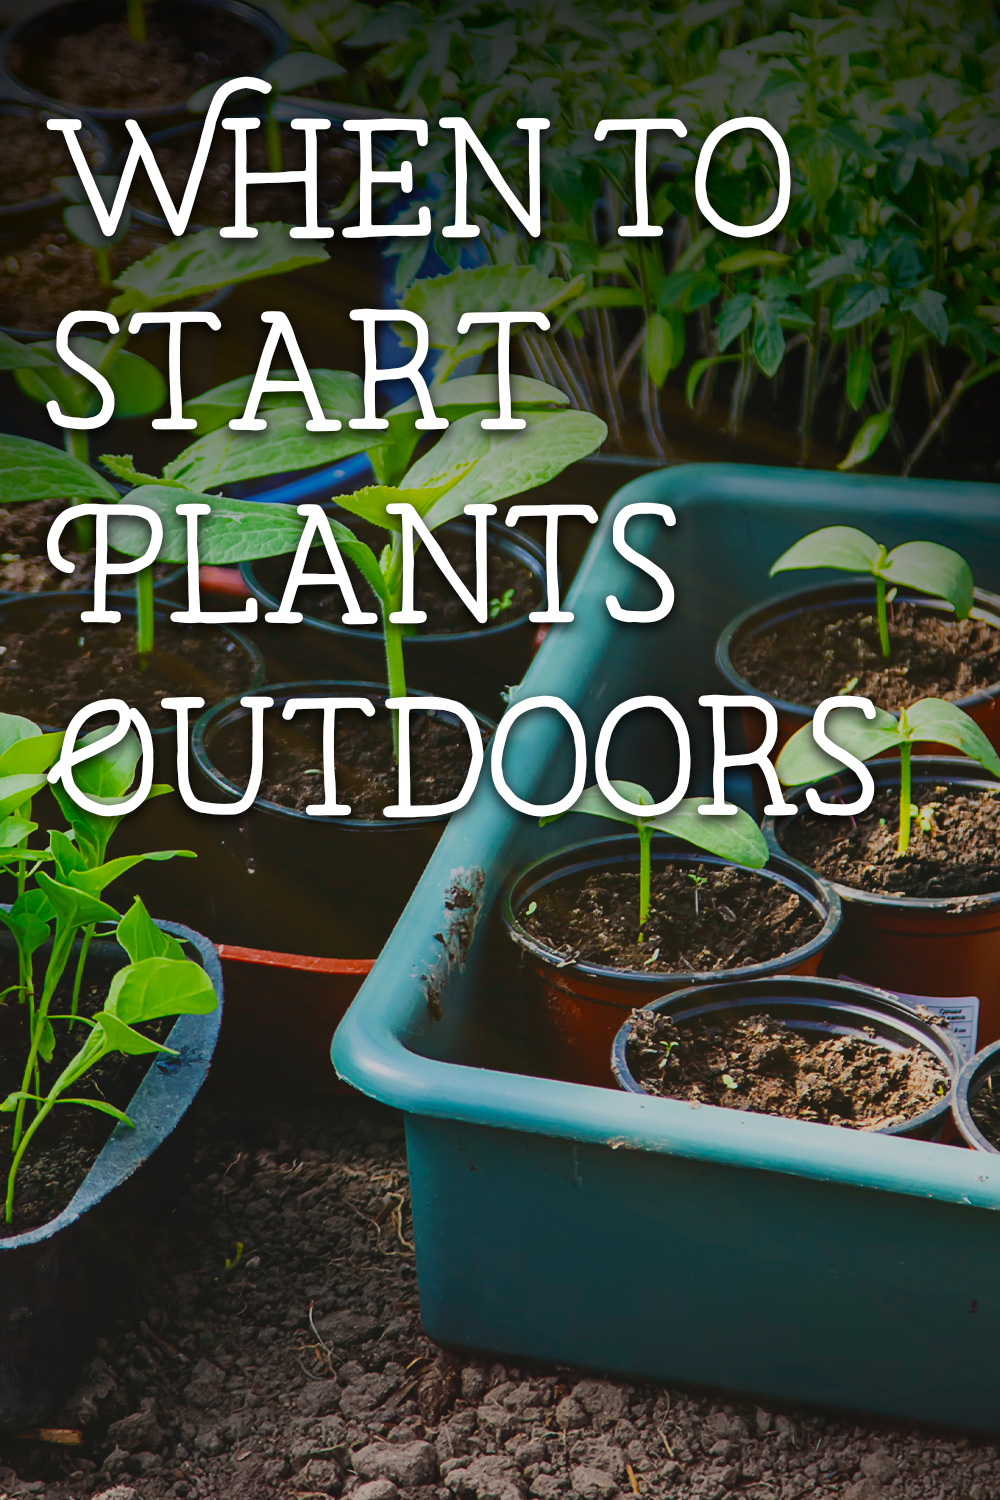 When to Start Plants Outdoors – How to learn what’s right for your area